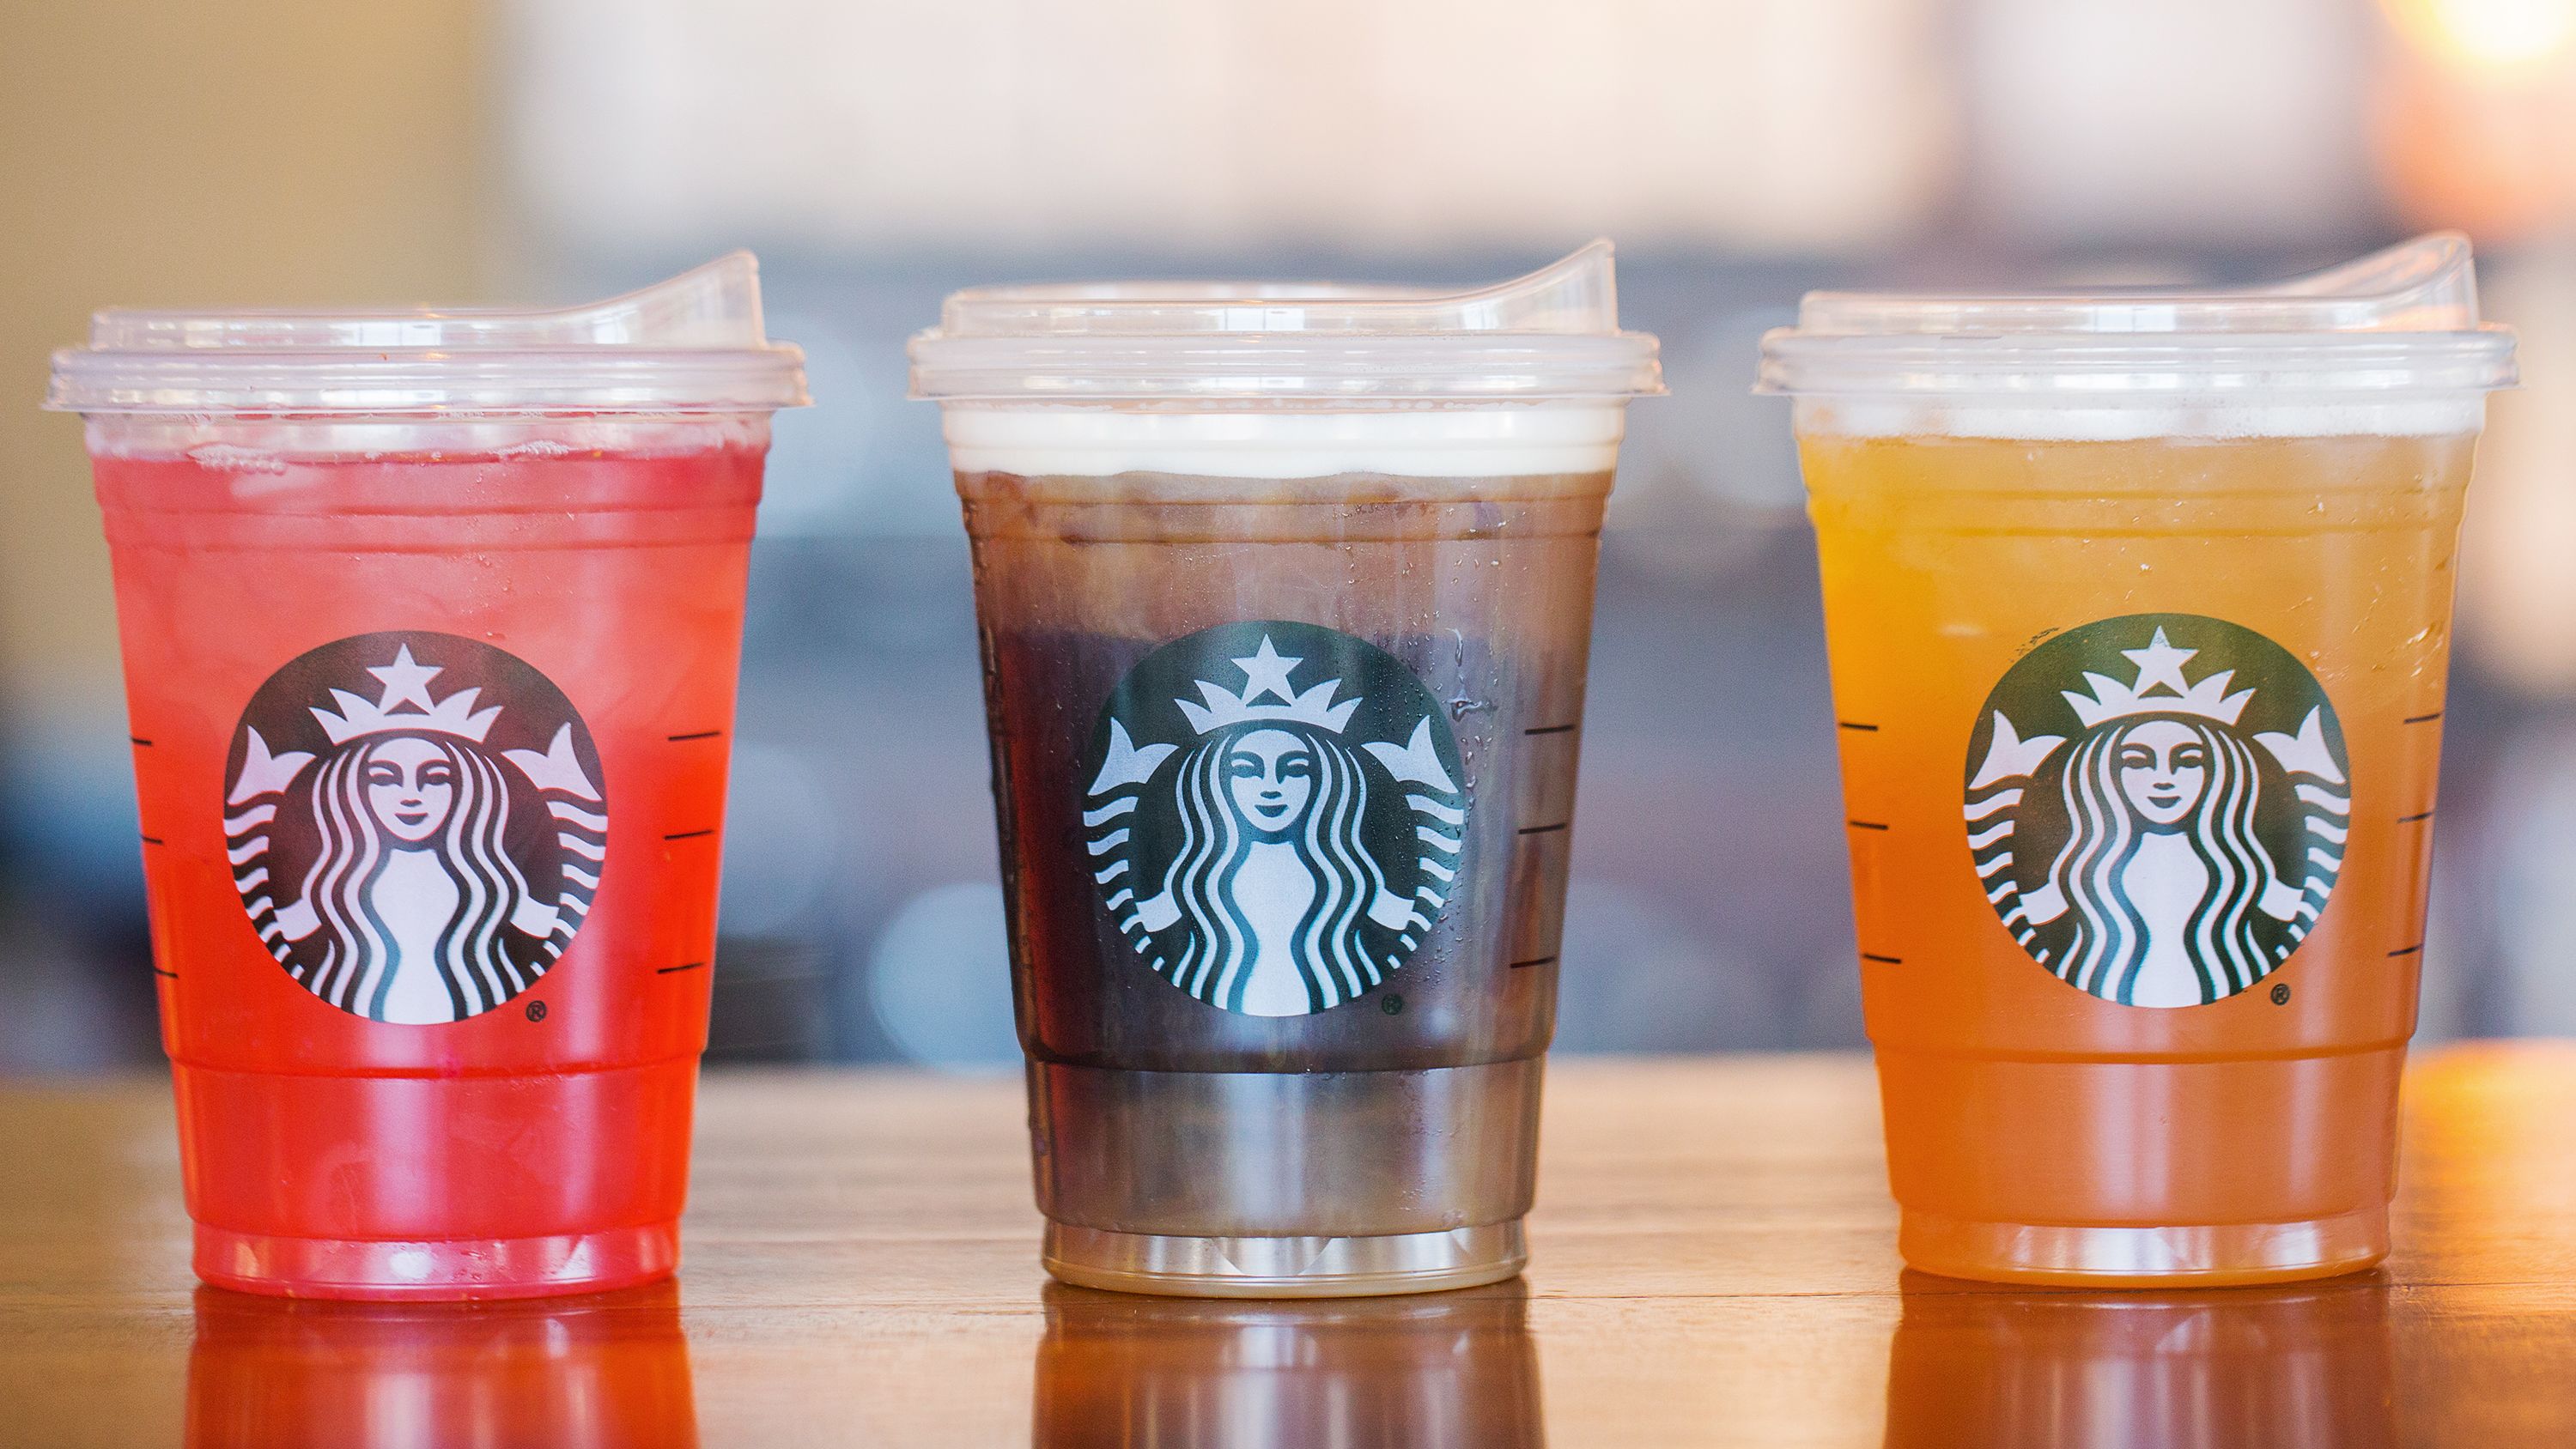 Starbucks announces test of recyclable, compostable cups